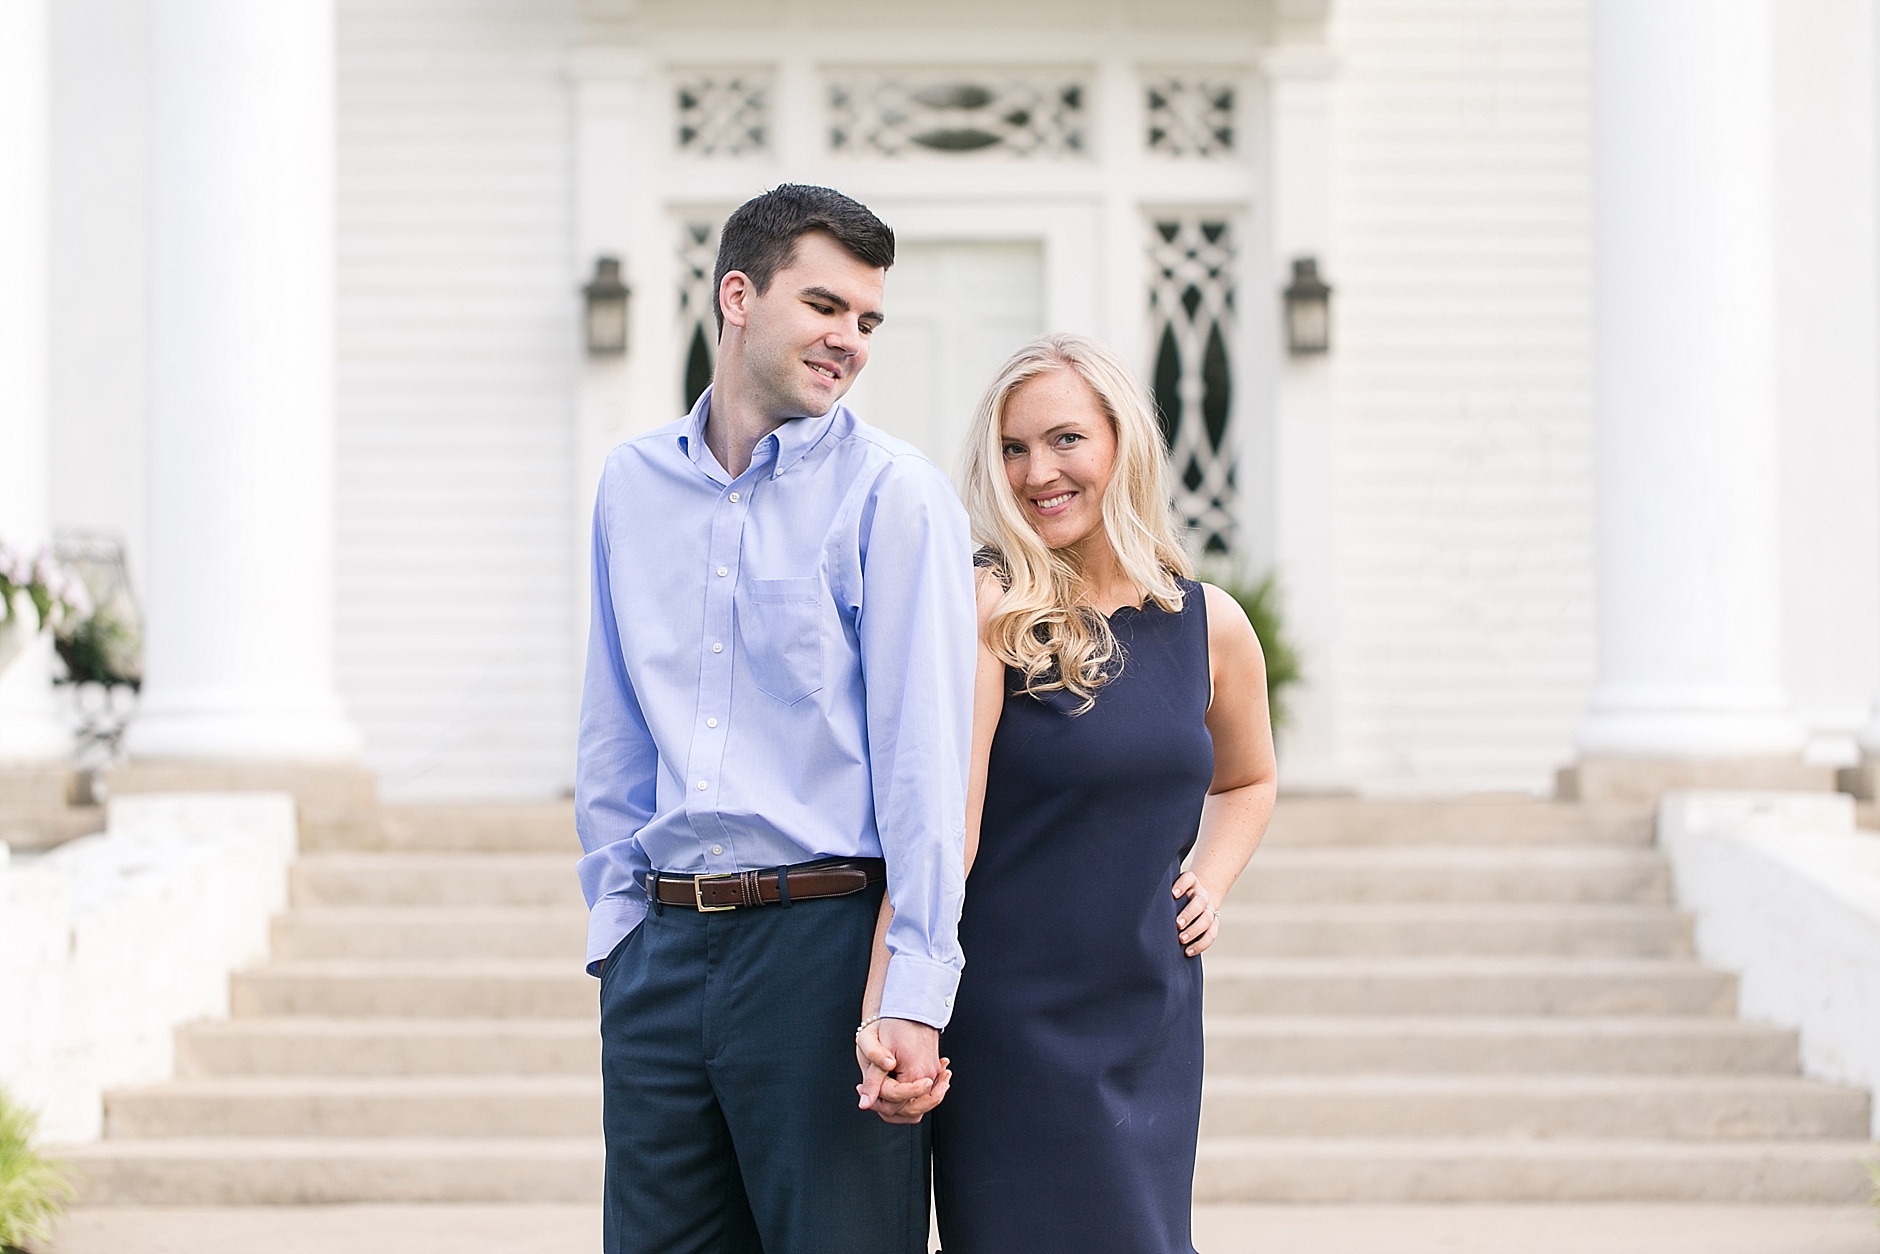 A spring Historic Family Home engagement session by Rachael Houser Photography